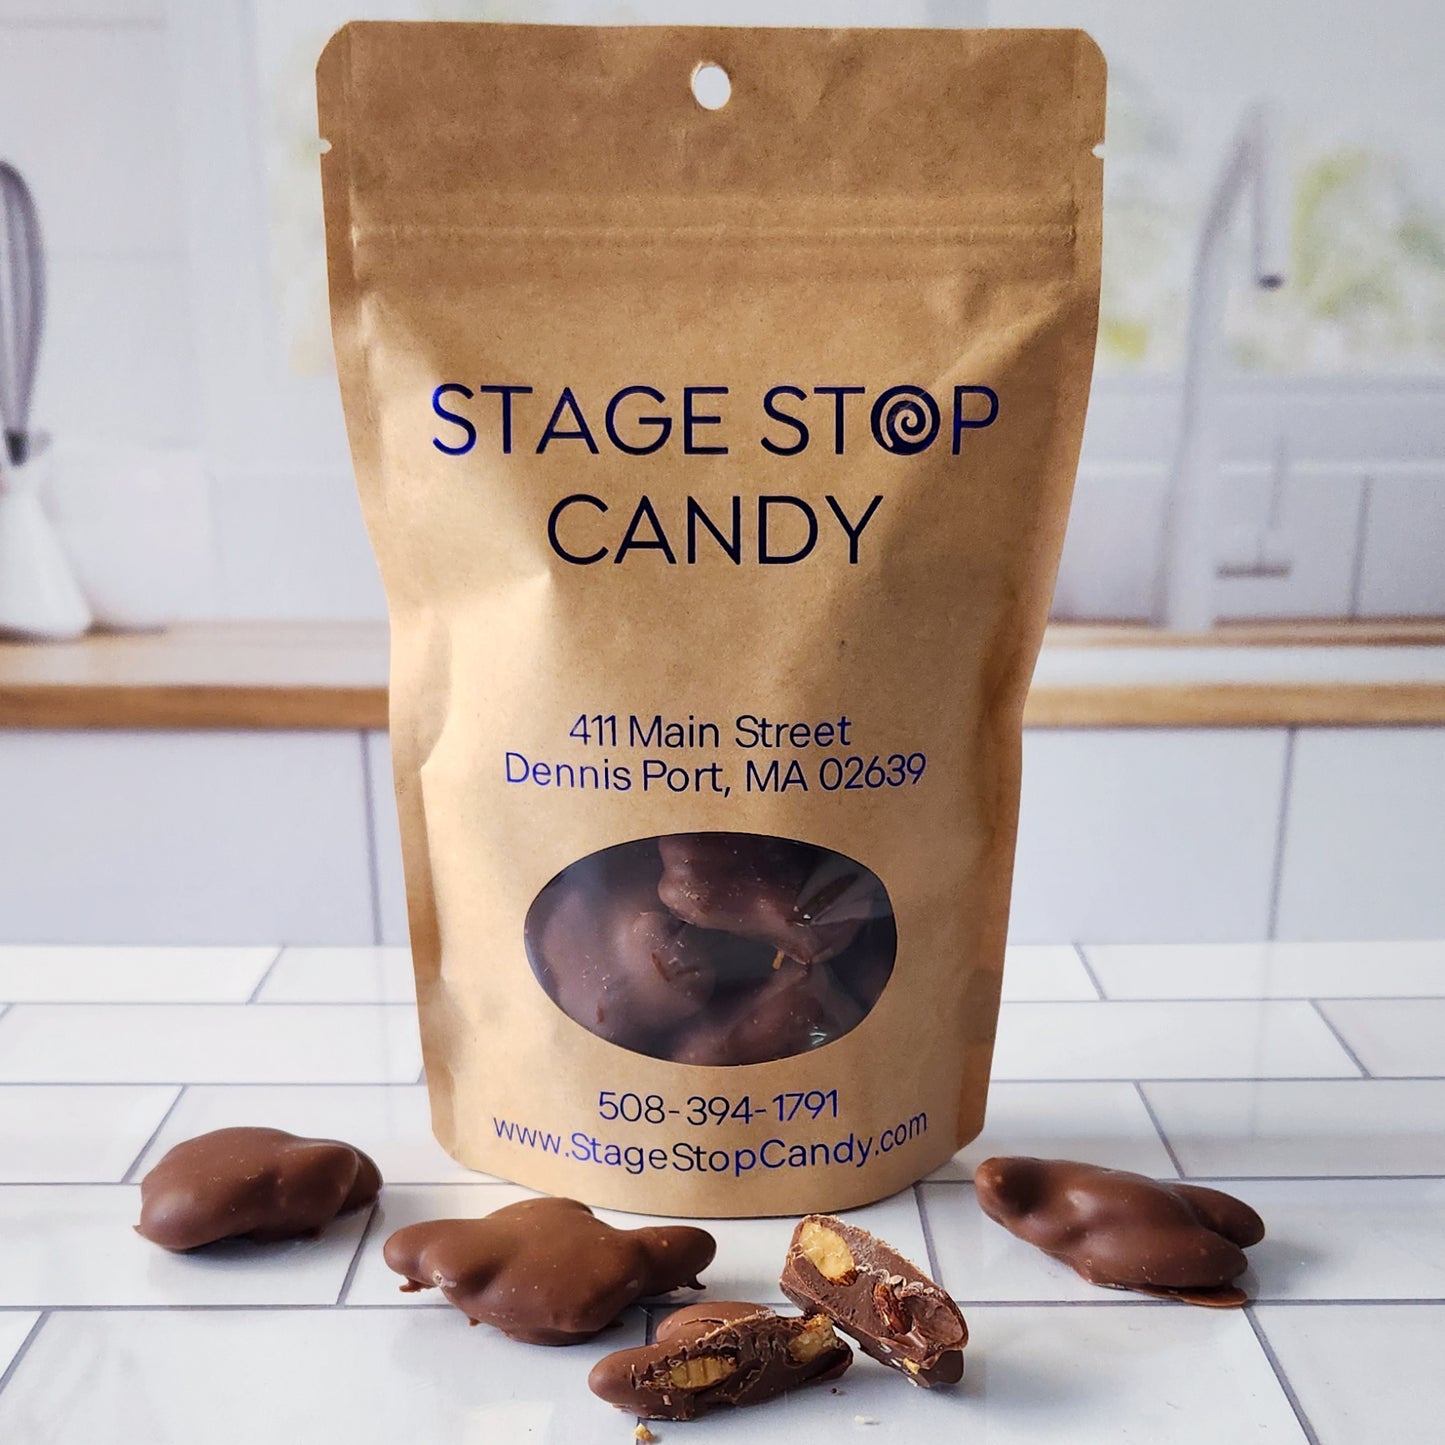 Enjoy the perfect combination of whole, crunchy almonds and smooth chocolate with our Almond Clusters, available in rich milk chocolate. Each 6-ounce bag offers a luxurious treat for snacking, sharing, or gifting.